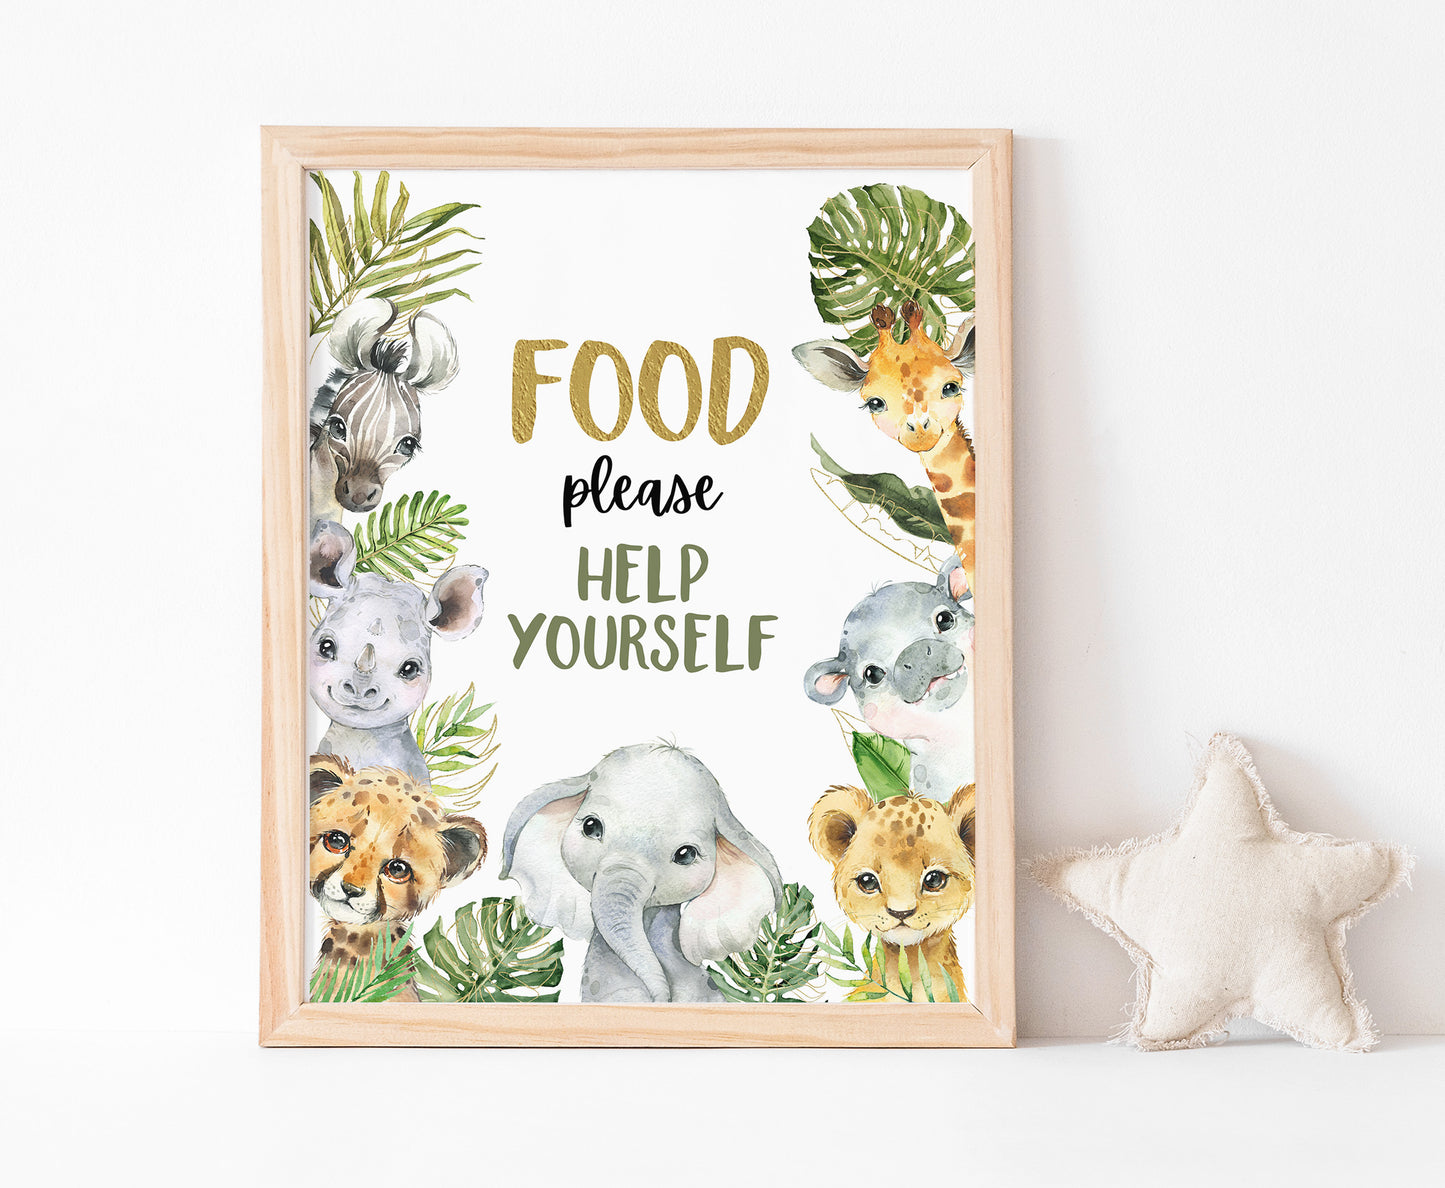 Food please help yourself table Sign | Safari Animals Party Table Decorations - 35A